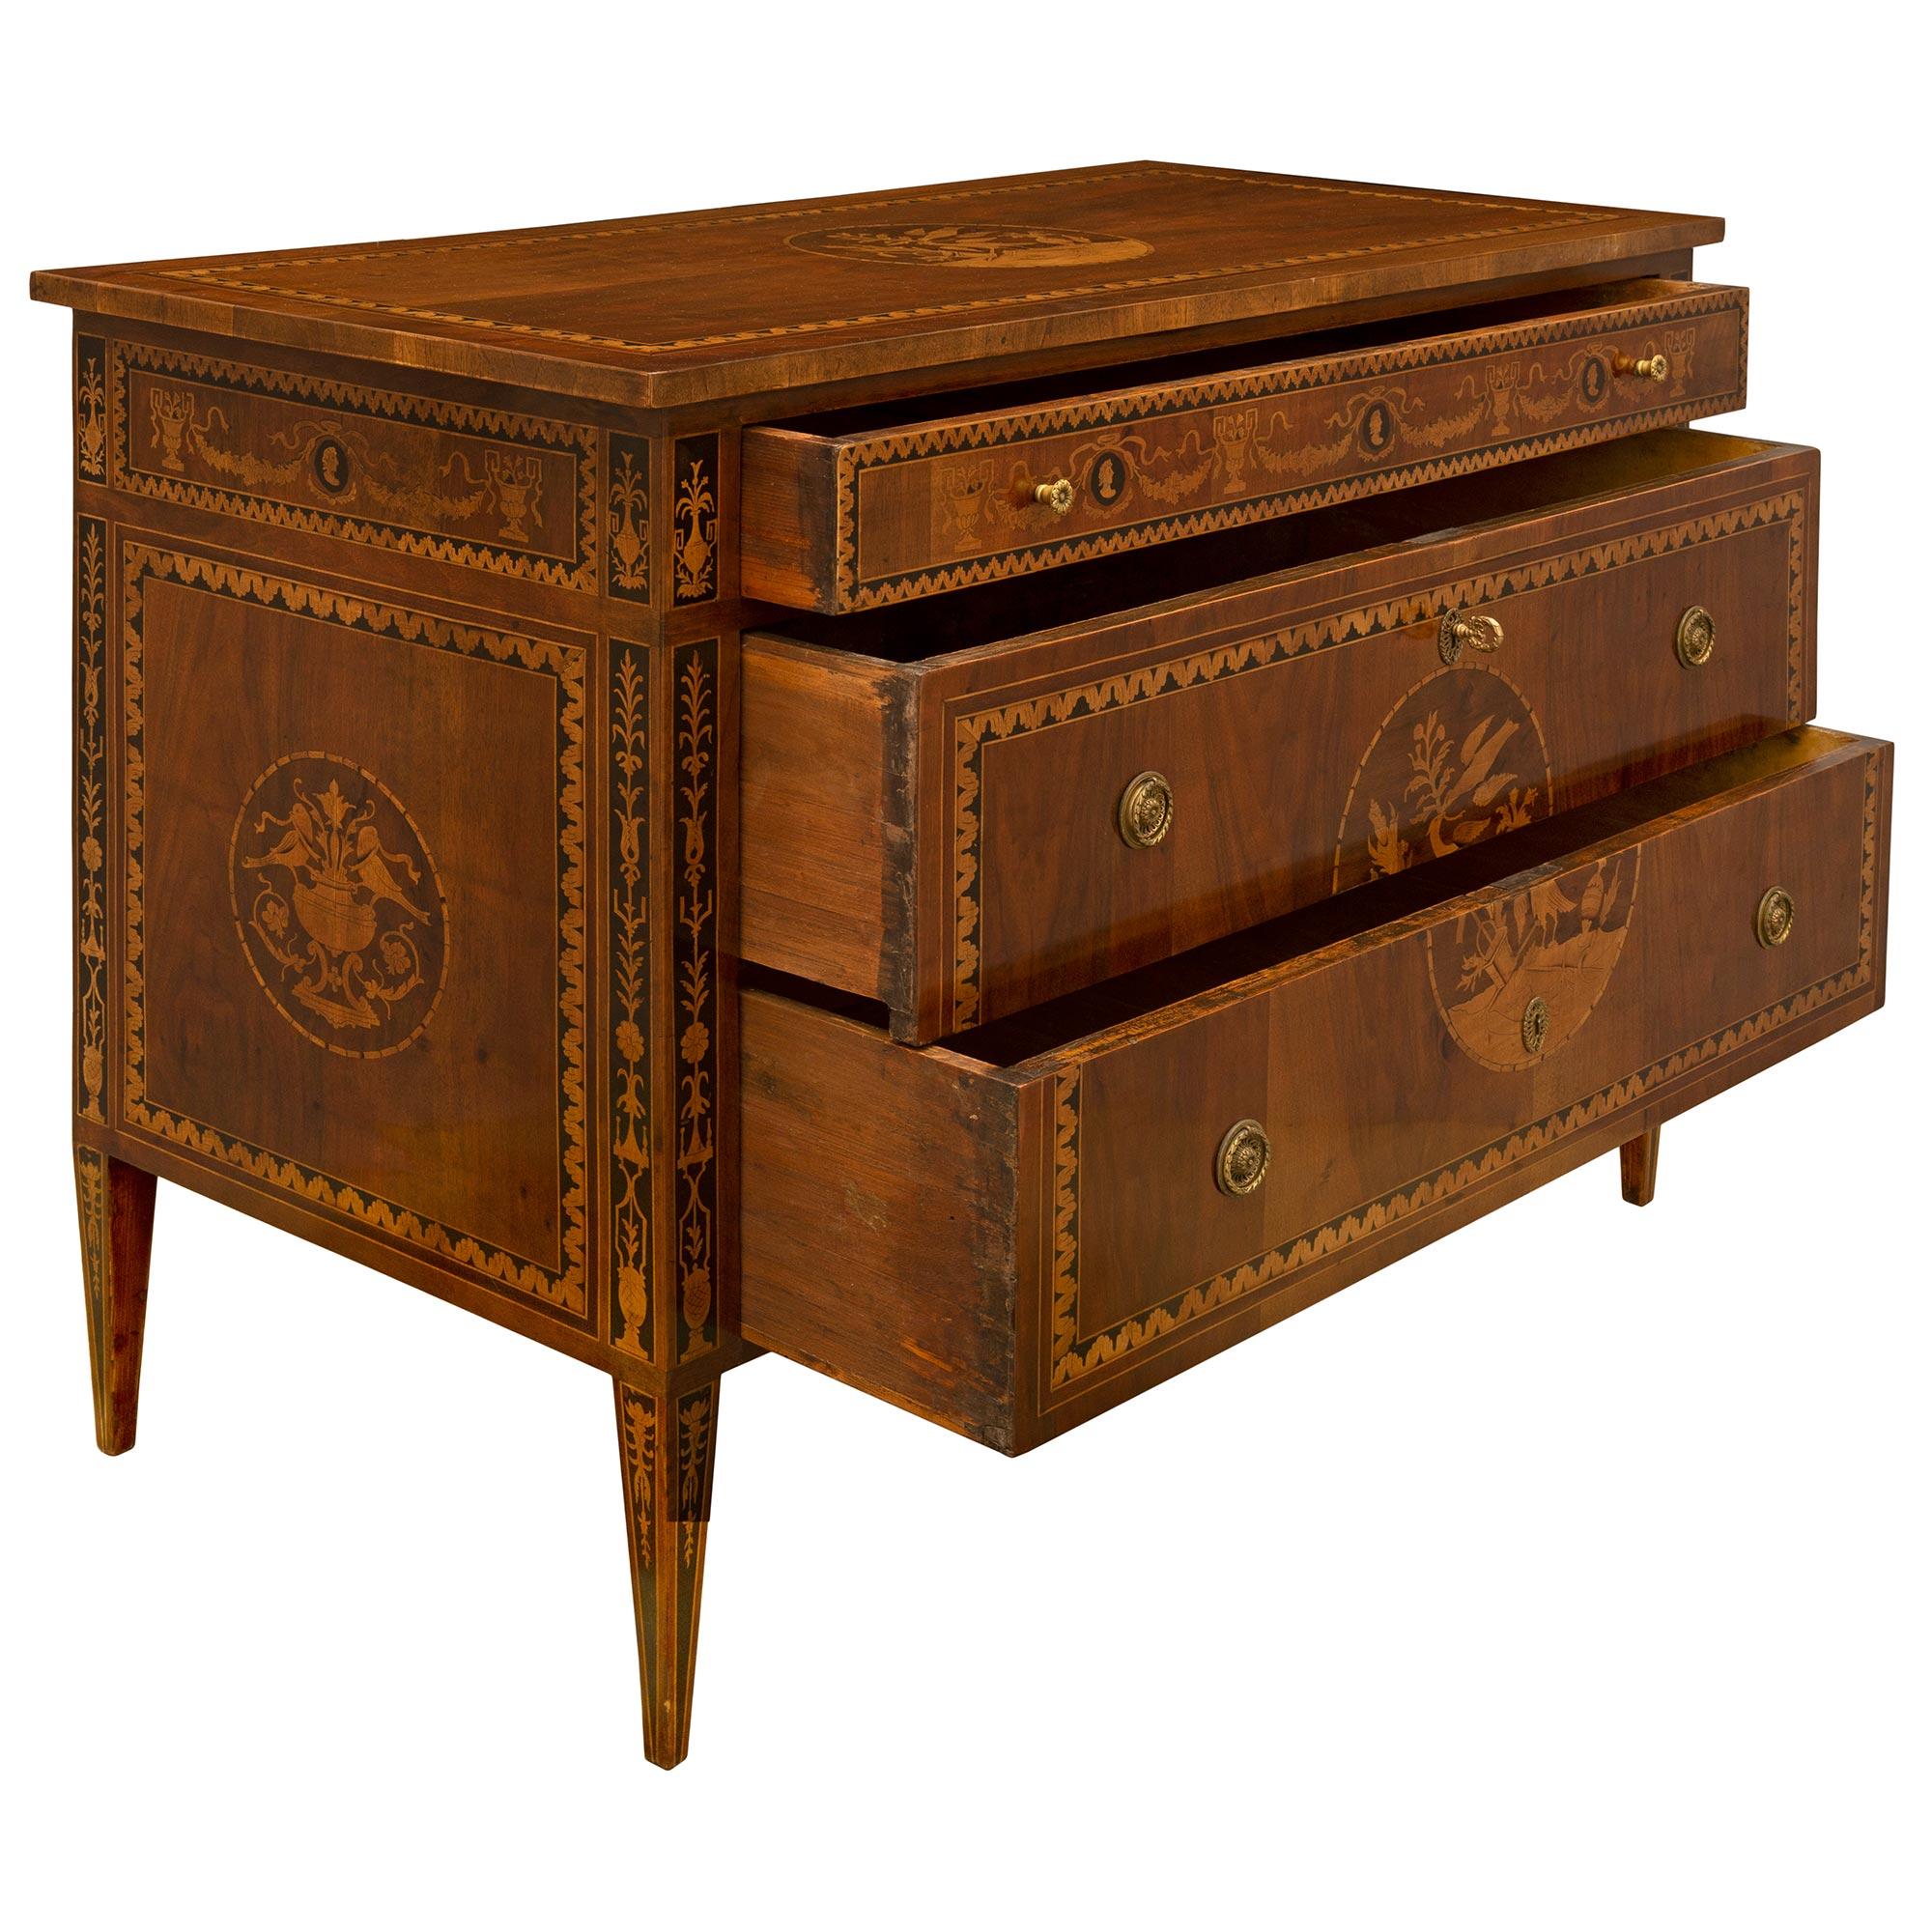 Italian 18th Century Louis XVI Period Walnut and Tulipwood Marquetry Commode In Good Condition For Sale In West Palm Beach, FL